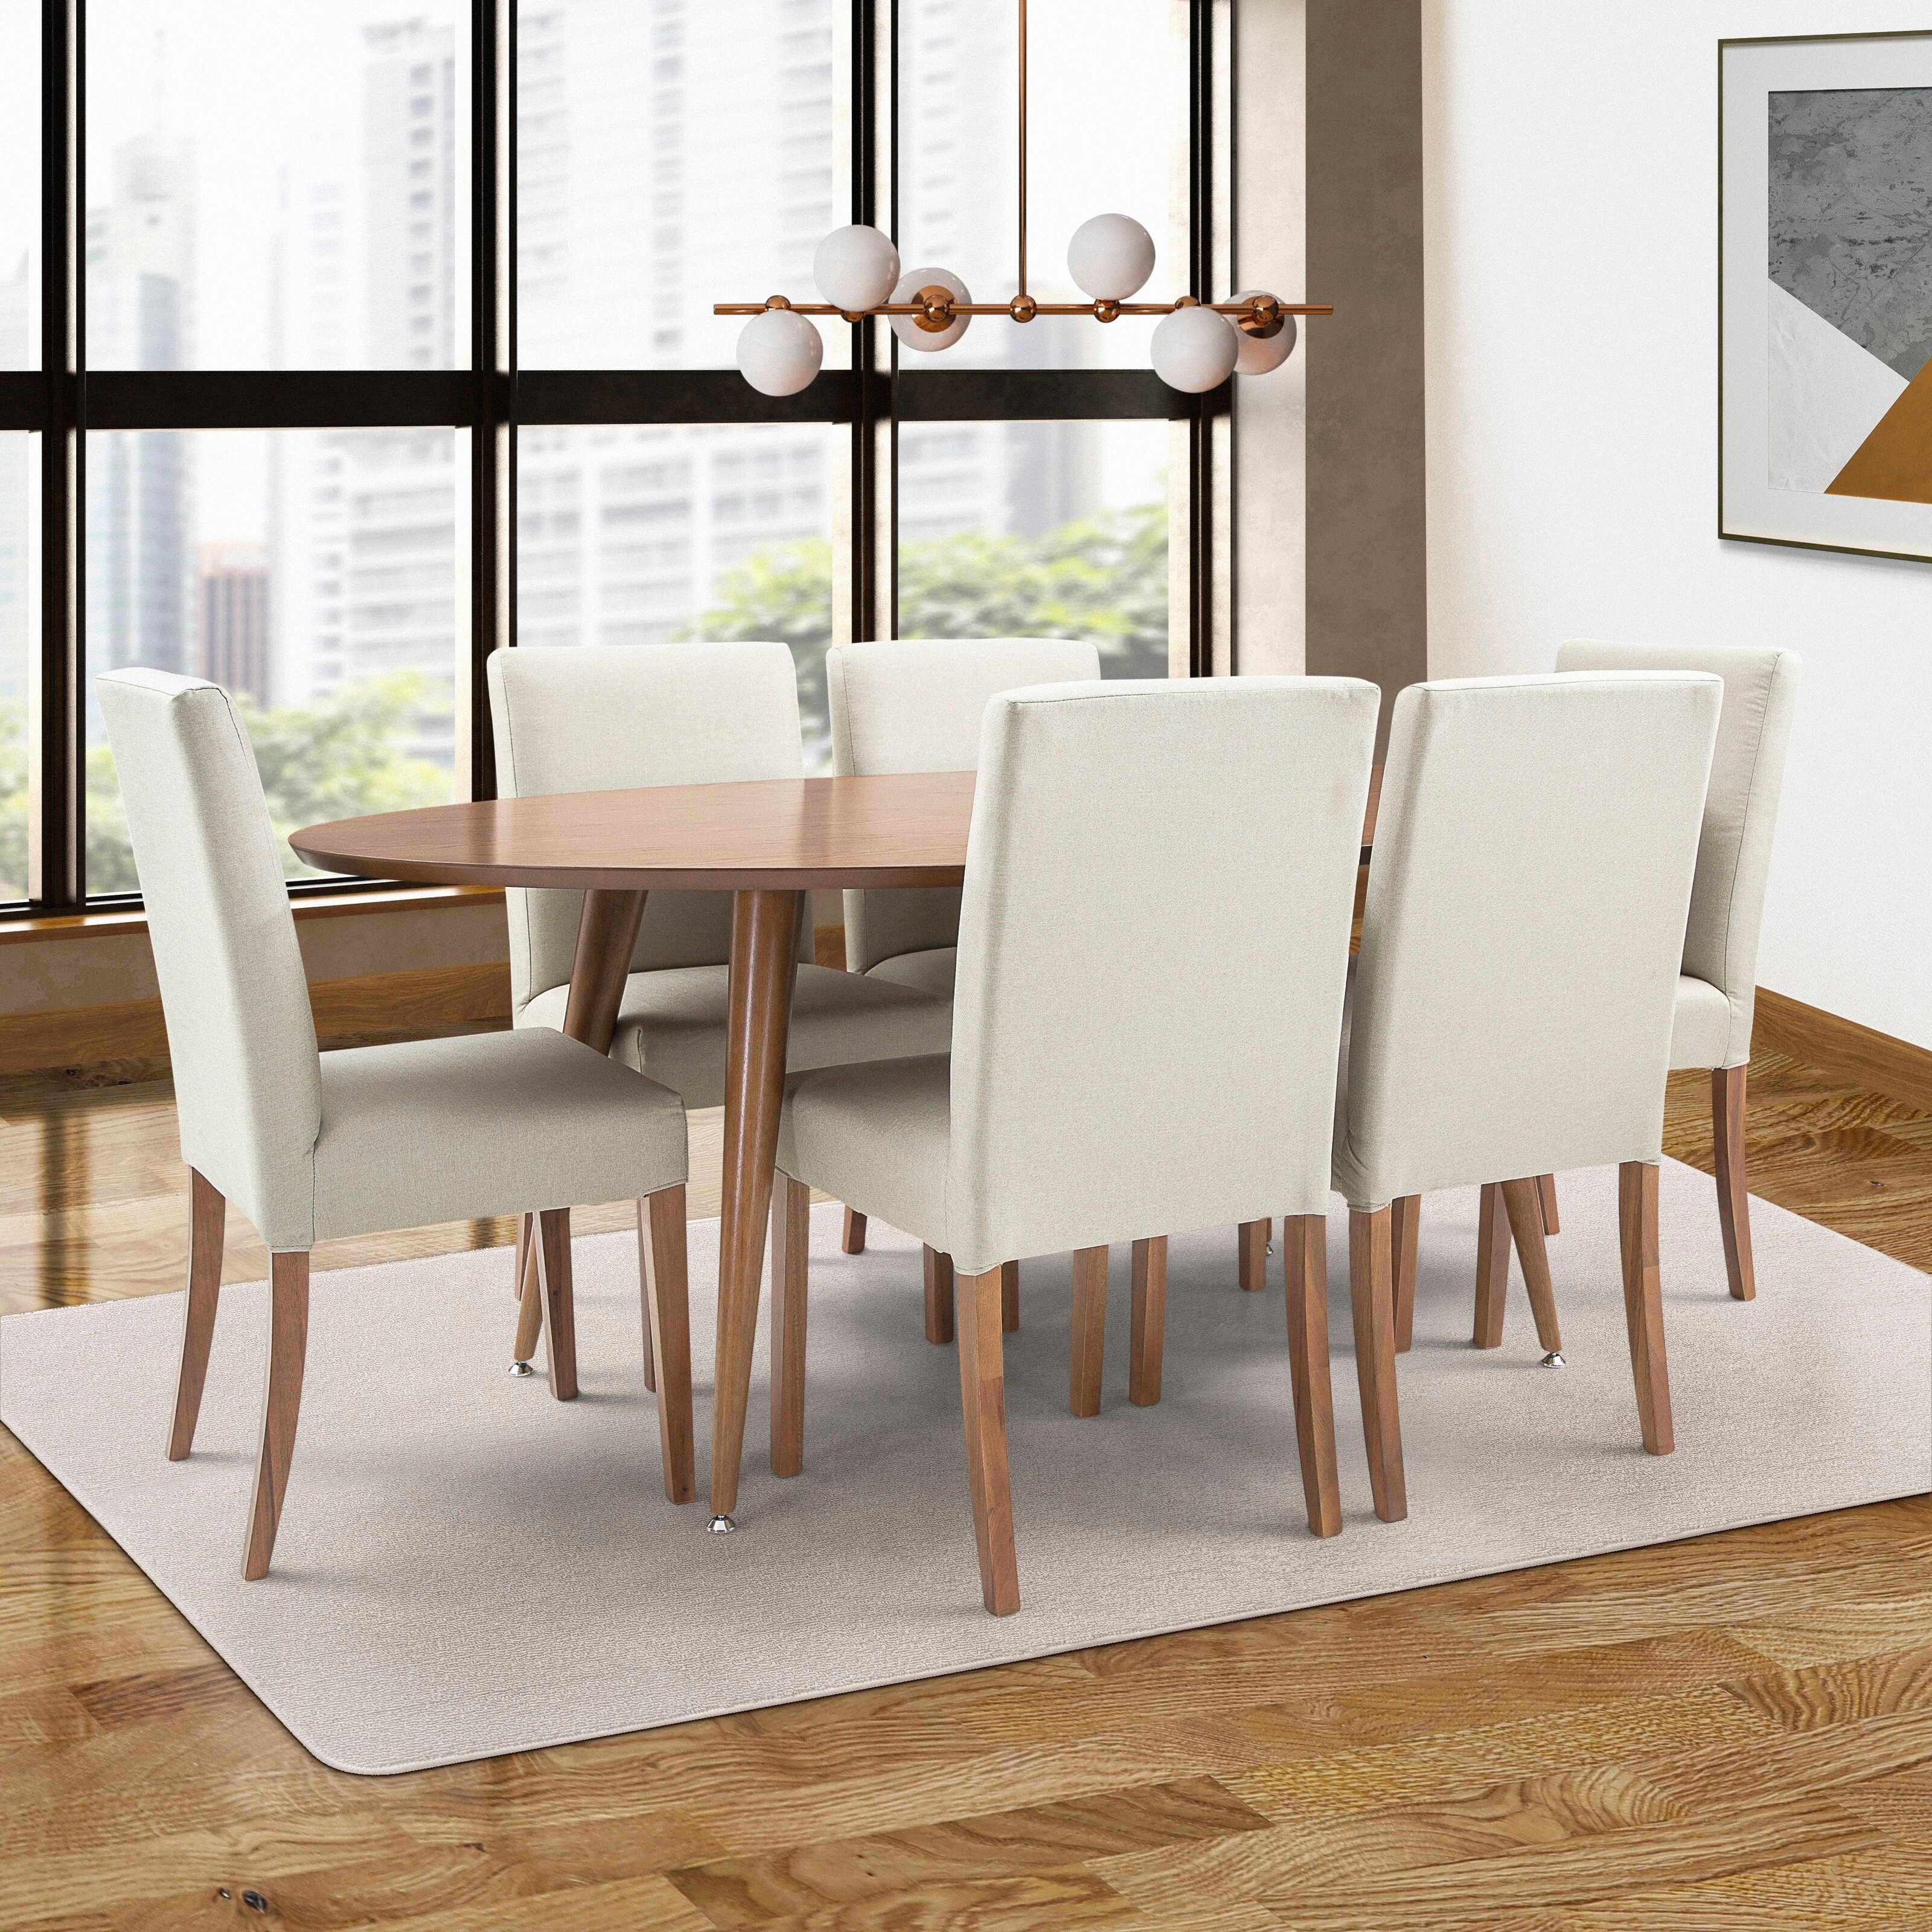 Acquanetta Solid Oak Dining Table - Image 2